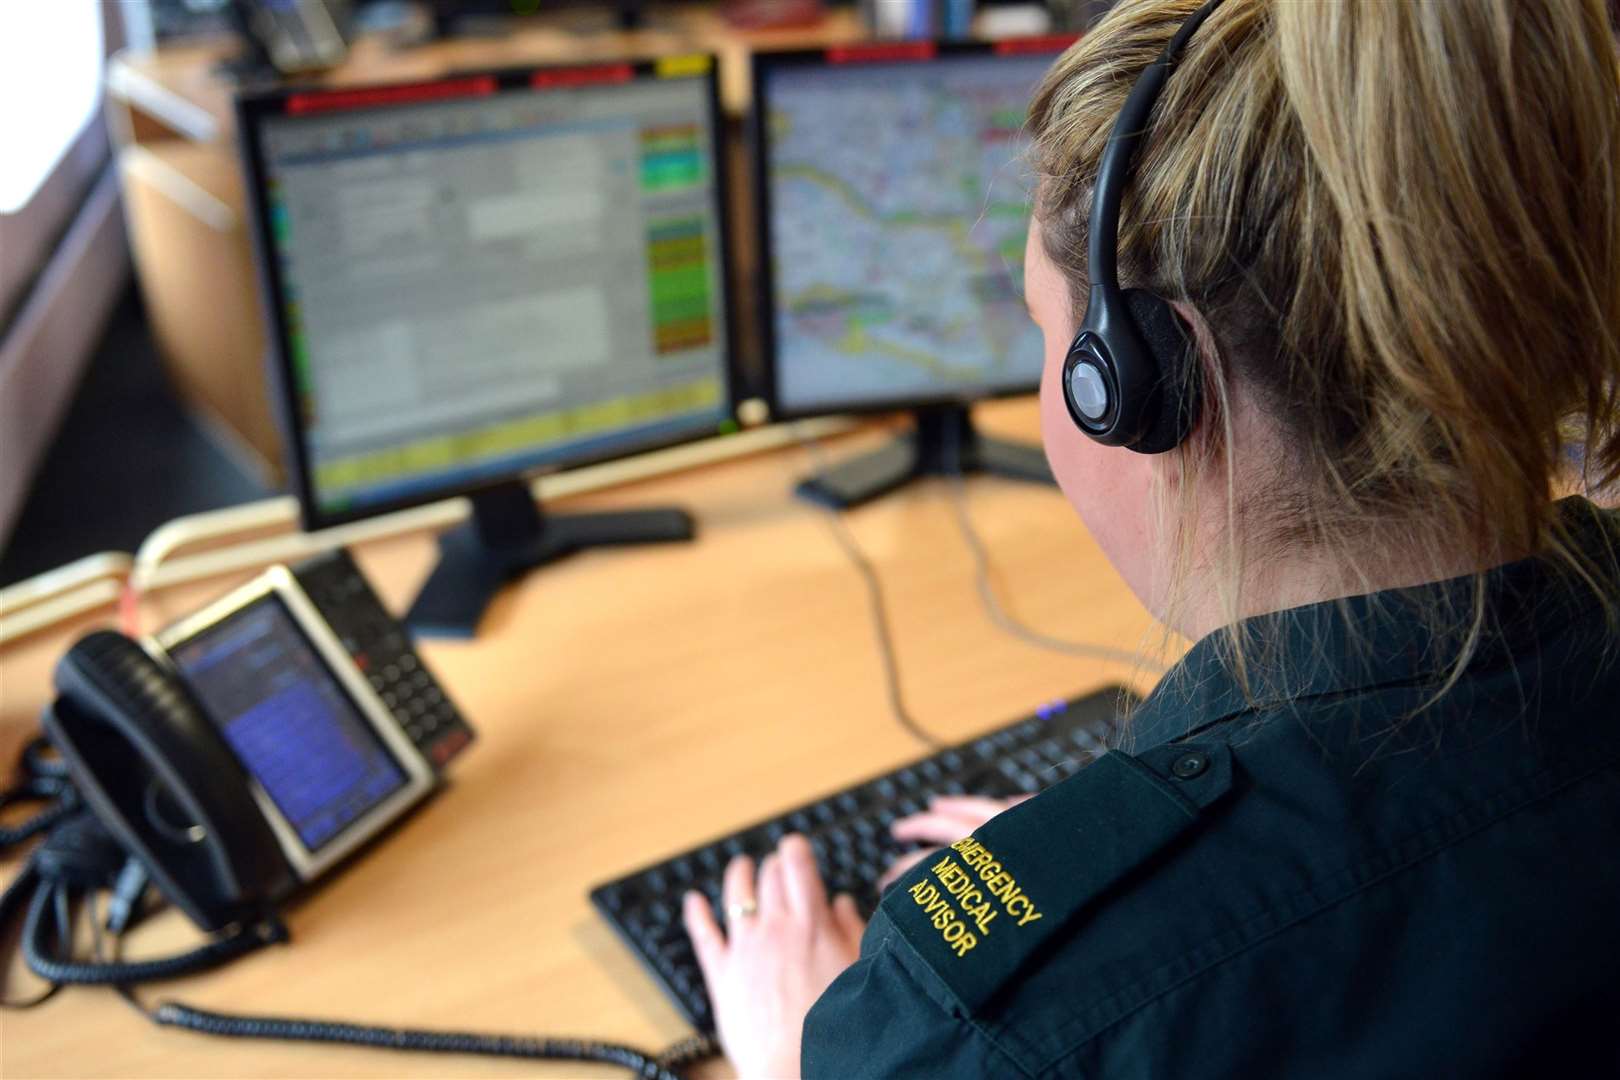 Staff at the service made 993 reports of ill mental health last year. Picture: South East Coast Ambulance Service